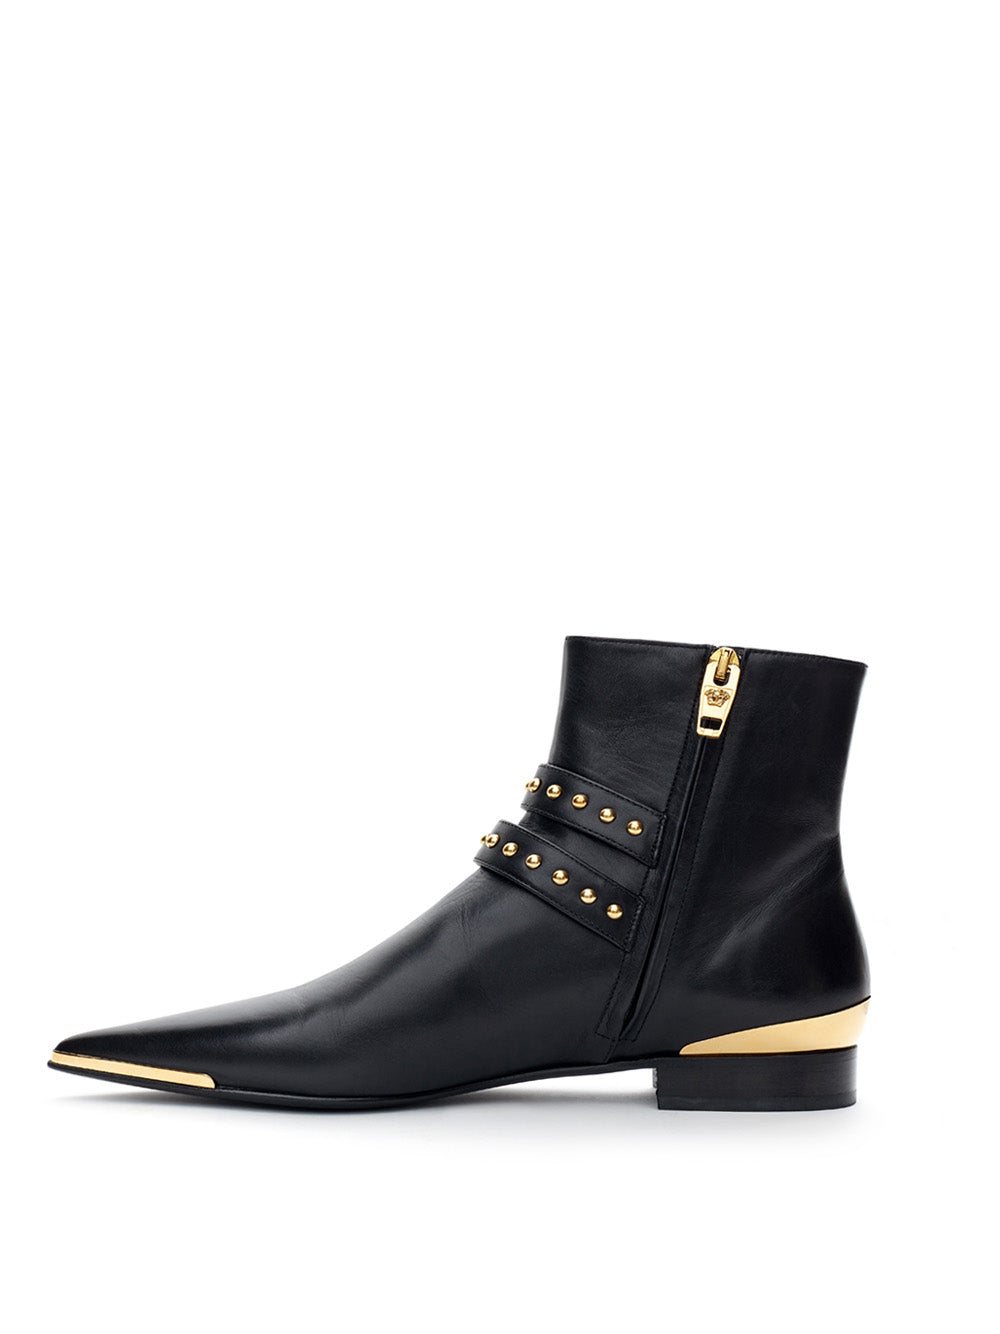 Black ankle boot with Versace Gold Studs